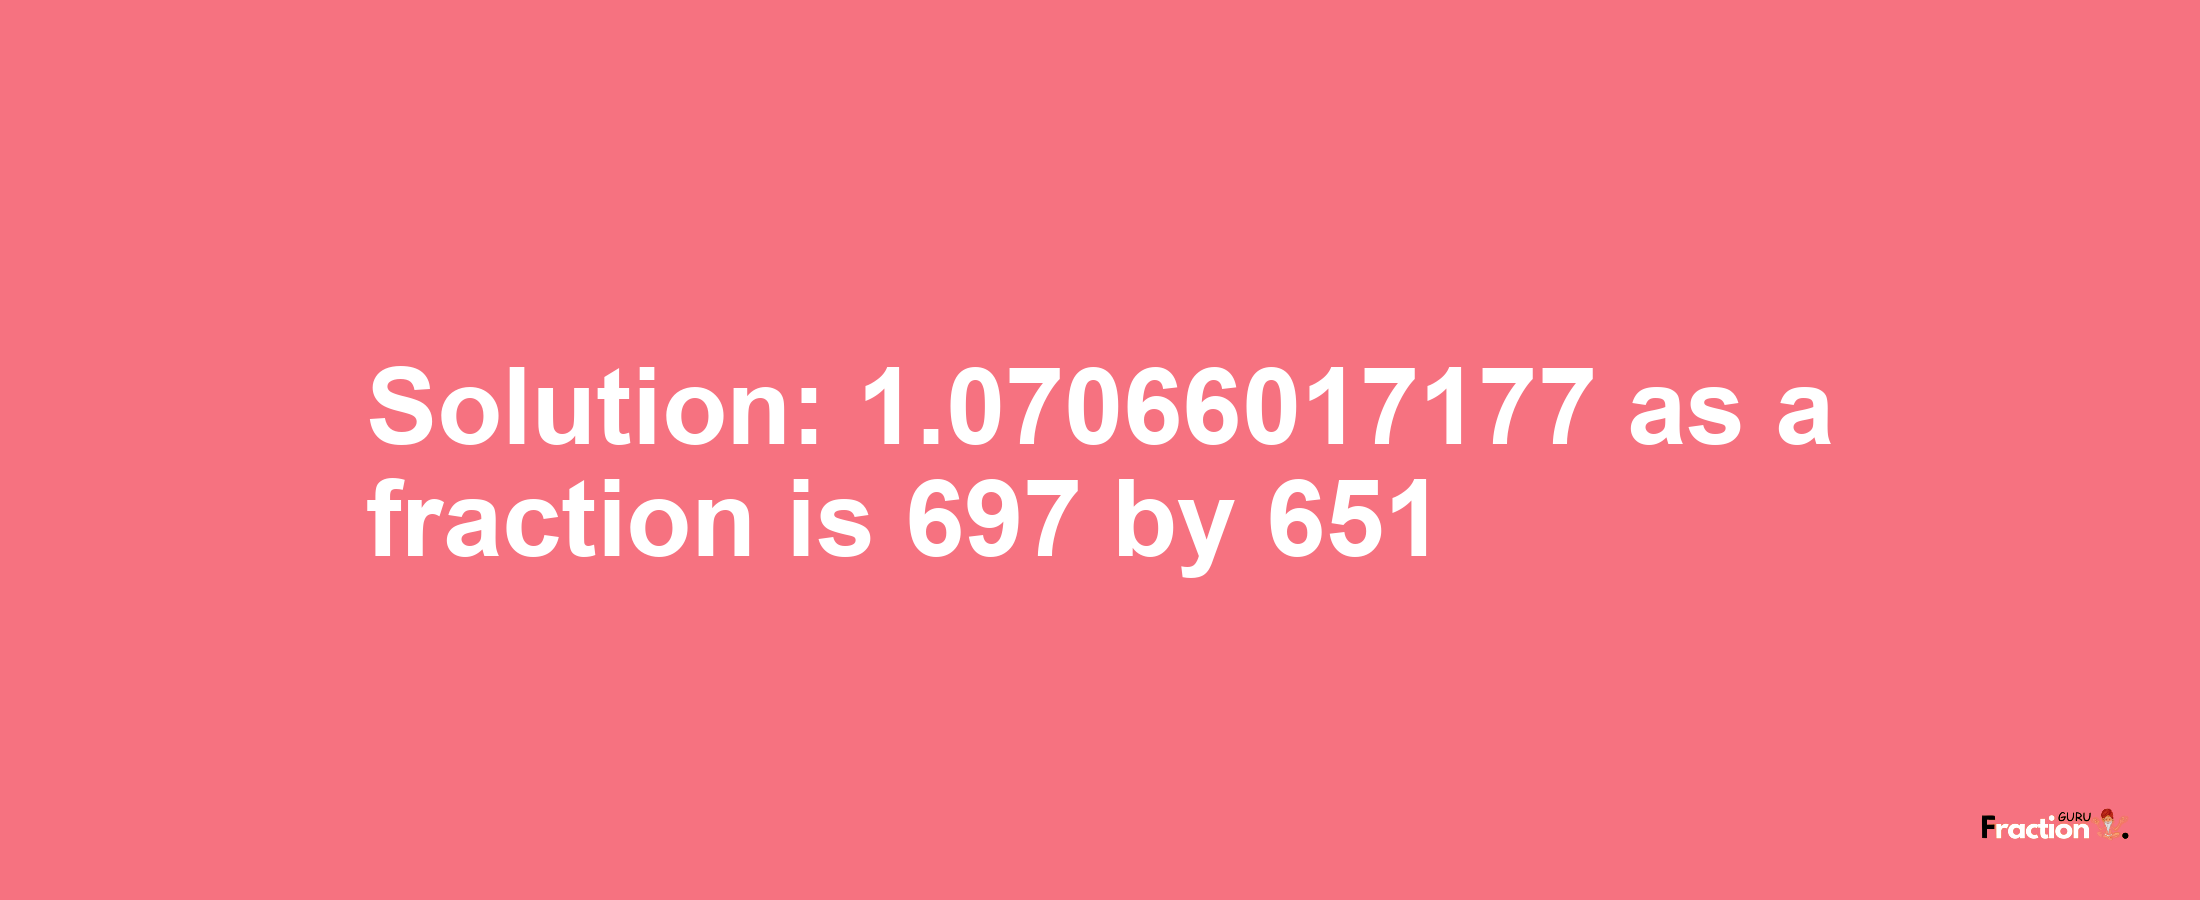 Solution:1.07066017177 as a fraction is 697/651